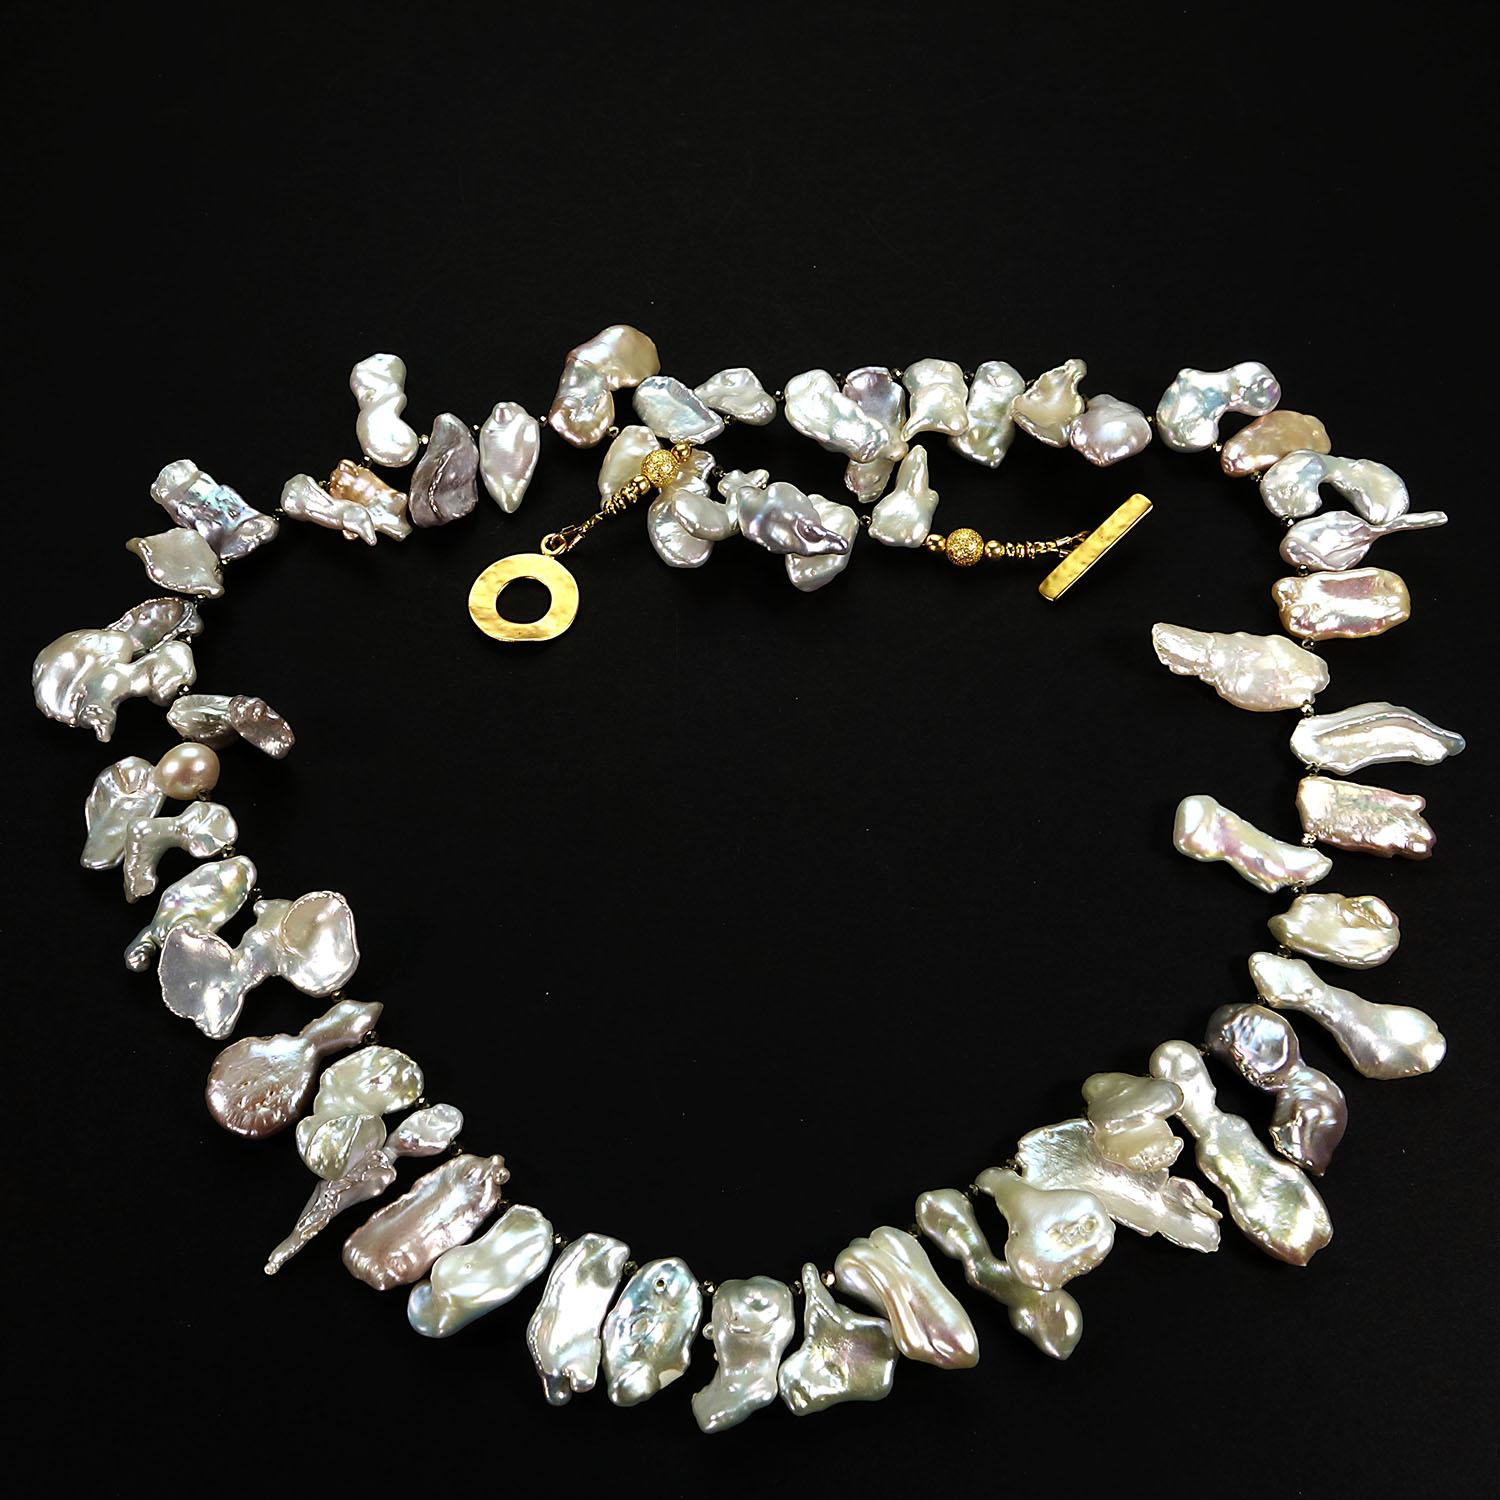 Women's or Men's AJD Freeform, Iridescent Pearls Necklace Pyrite accents   Fabulous Gift!!!